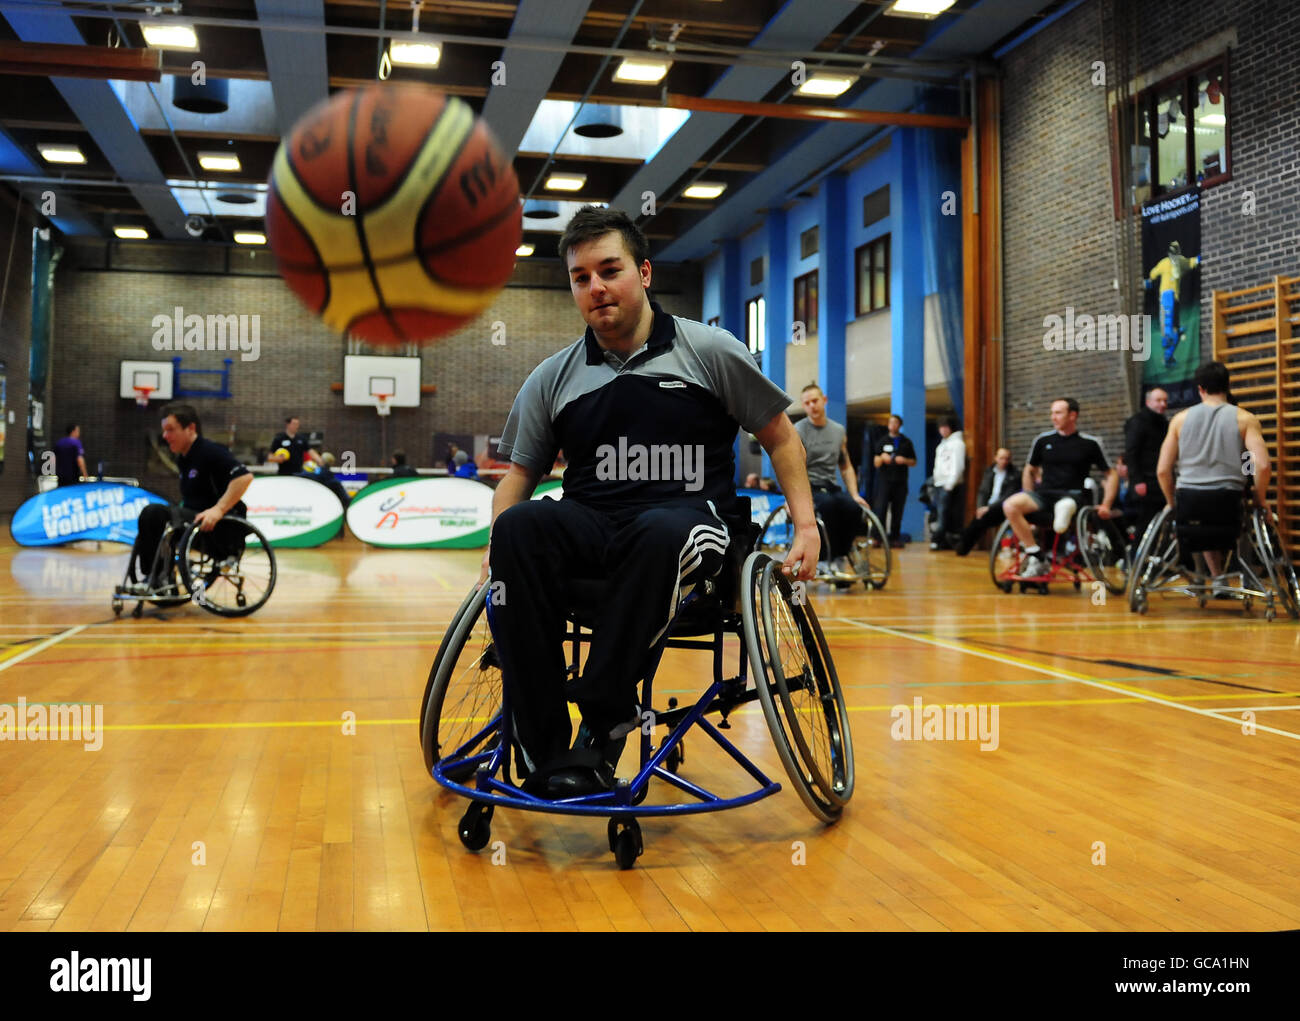 Press Association Journalist Alex Brooker takes part in the Basketball part of the ParalympicsGB London 2012 talent assessment day at the Munrow Sports Centre at the University of Birmingham Stock Photo